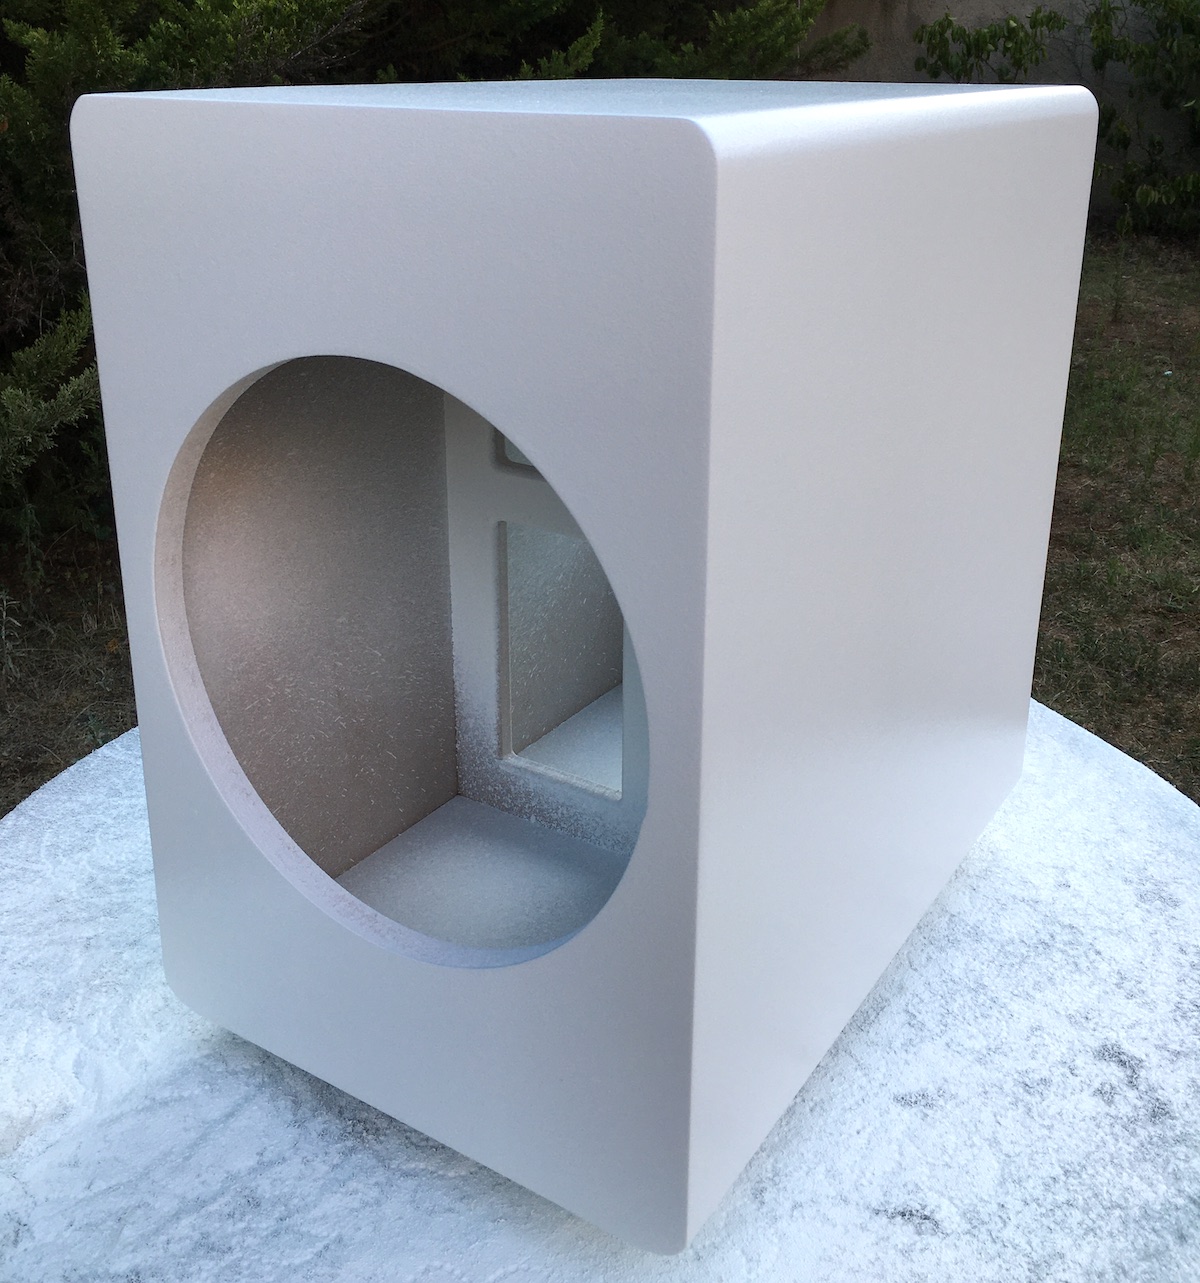 A dual opposed subwoofer box painted white with a paint gun.